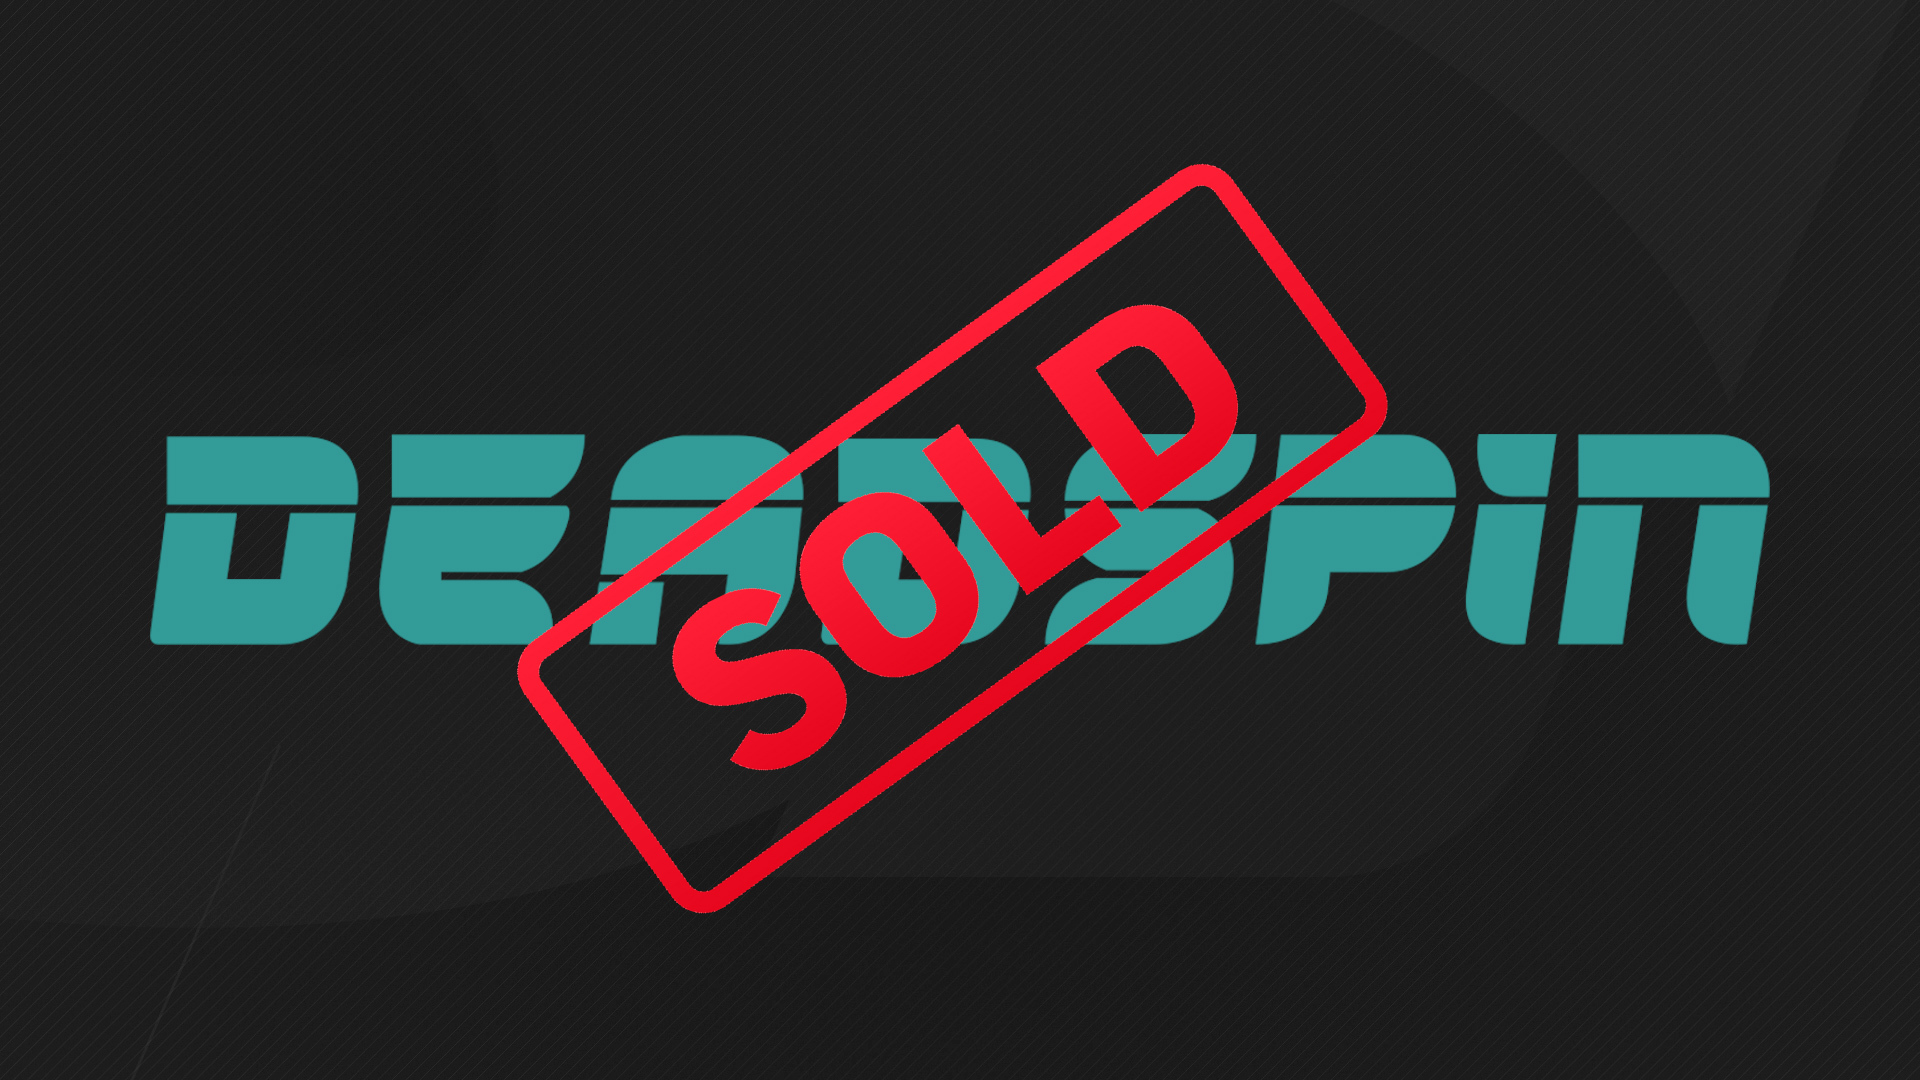 The sports website "Deadspin" has been sold, and the new owners have let go of all the existing employees.